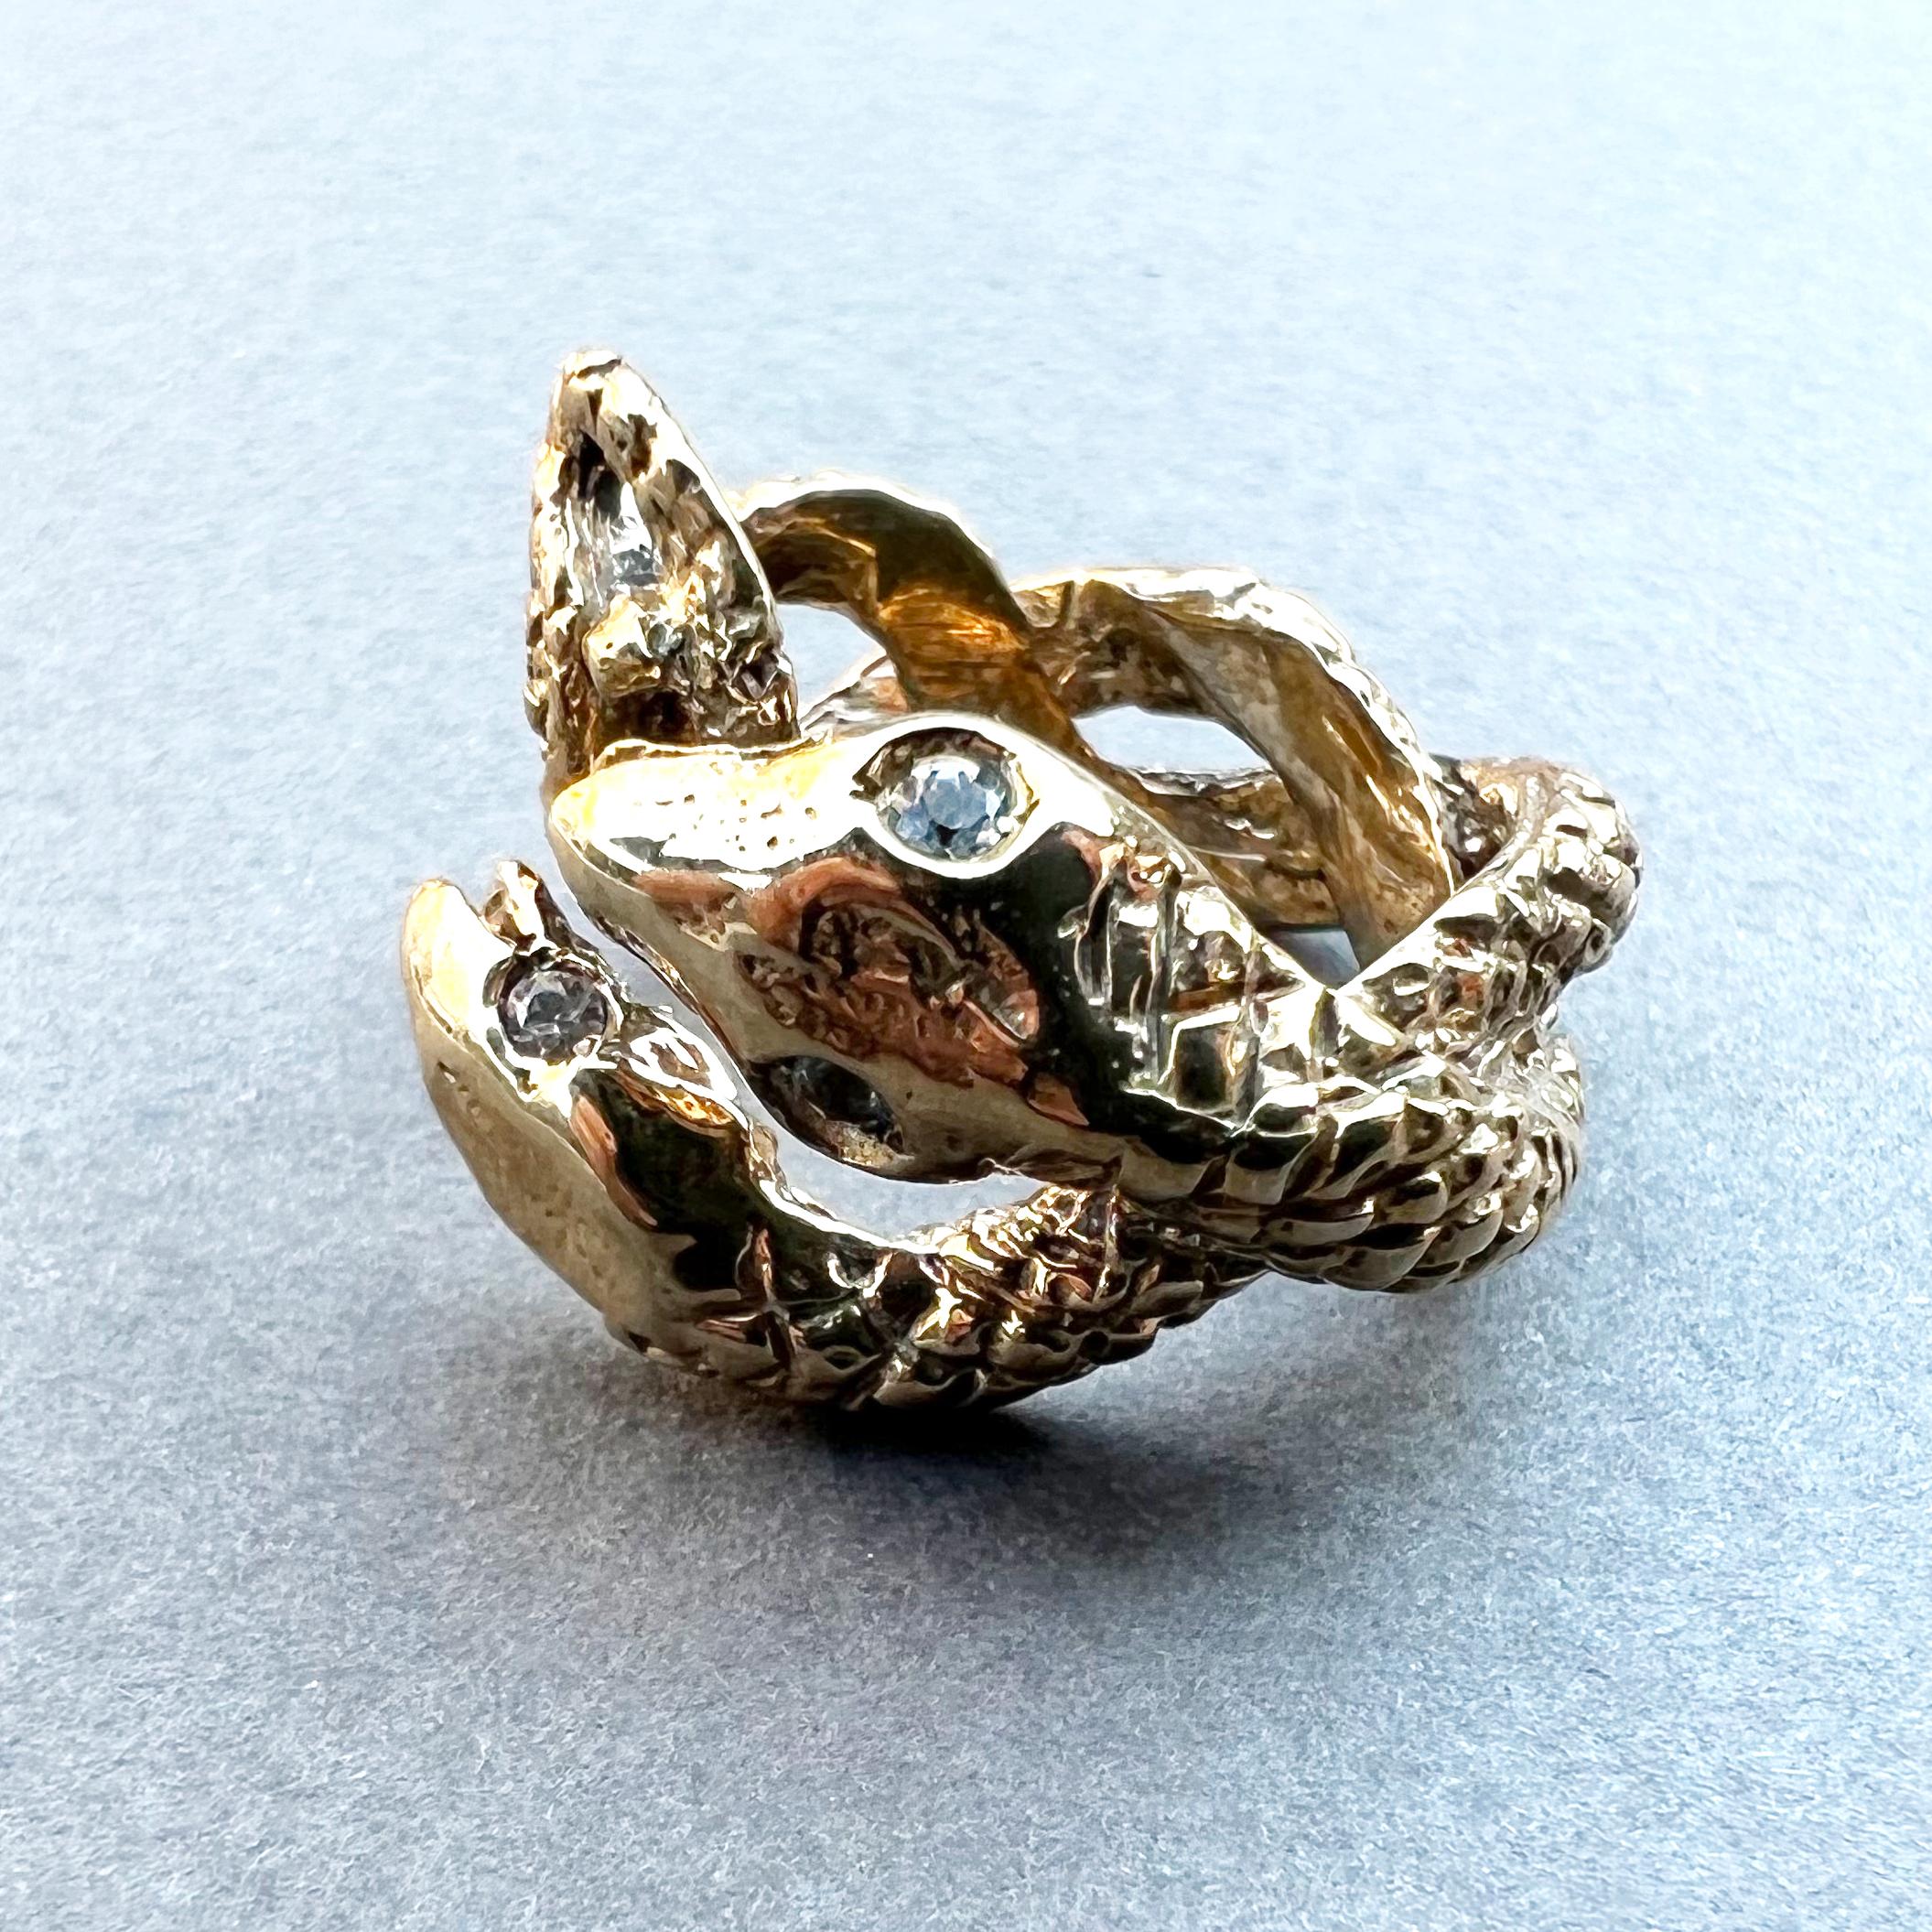 Snake Ring with 4  Pcs Aquamarine  made in Bronze Cocktail Ring J Dauphin

This ring is adjustable - fits size 6-8

J DAUPHIN 